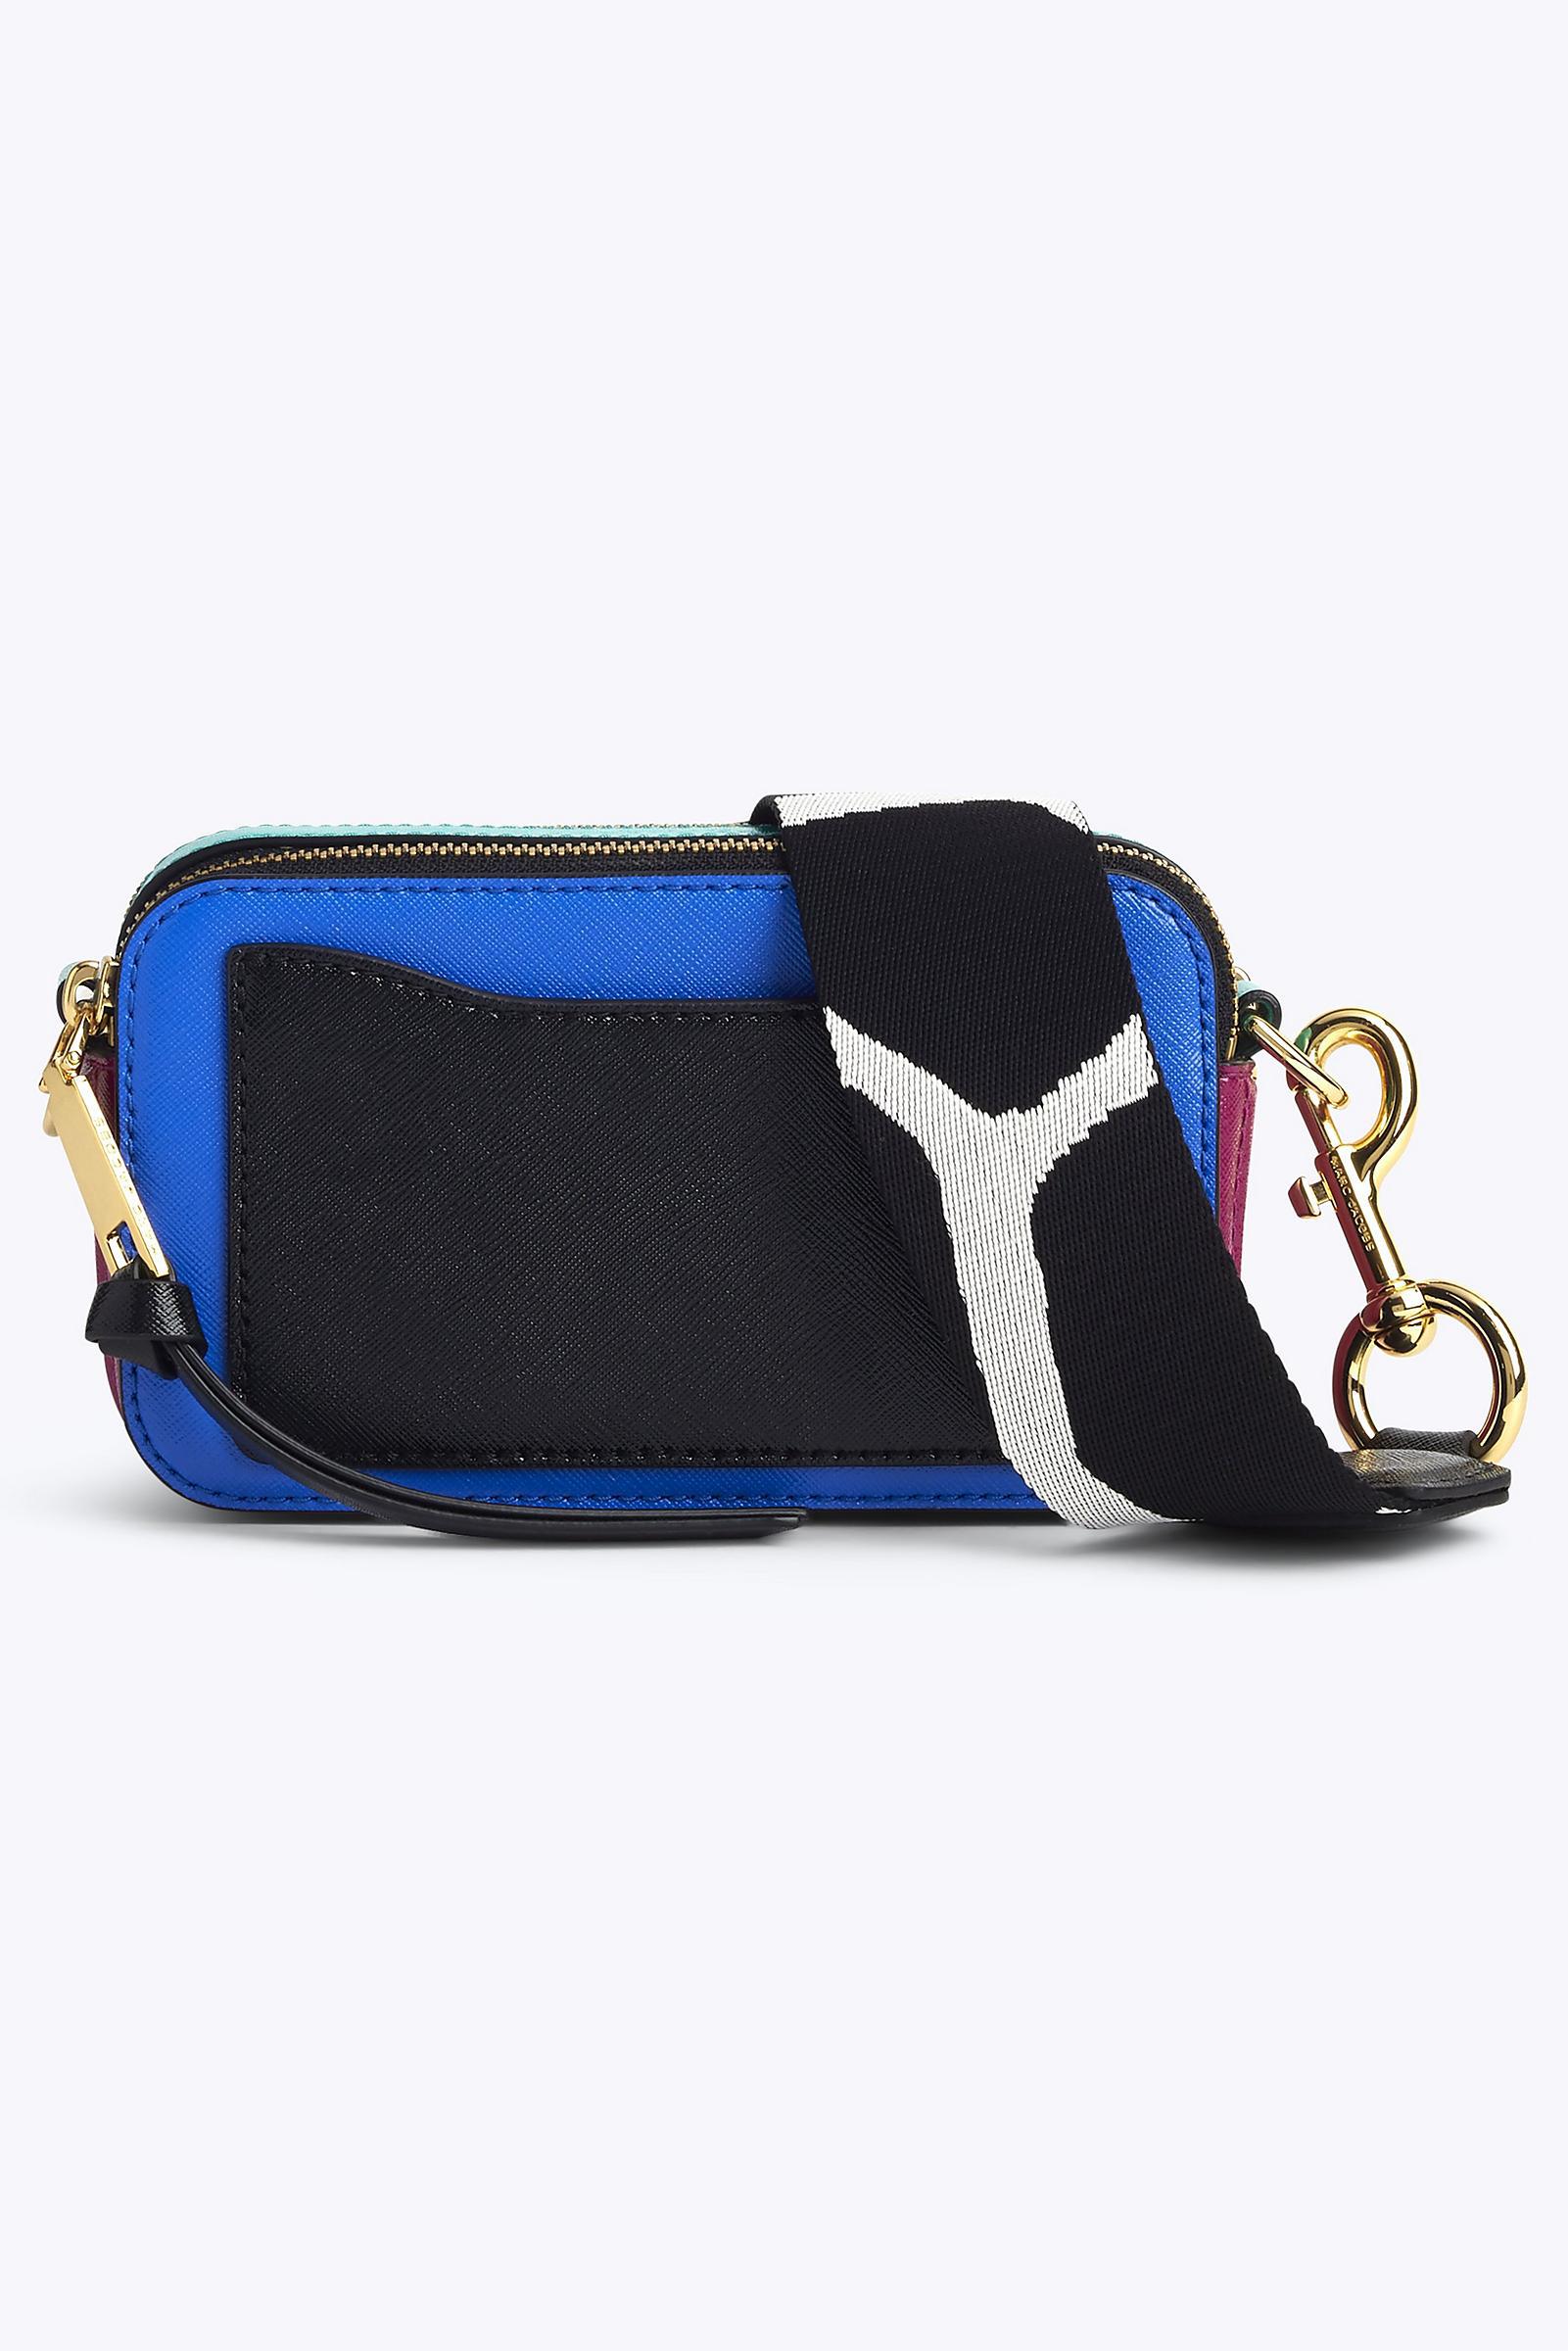 Marc Jacobs The Snapshot Small Camera Bag BLUE Model M0012007-462